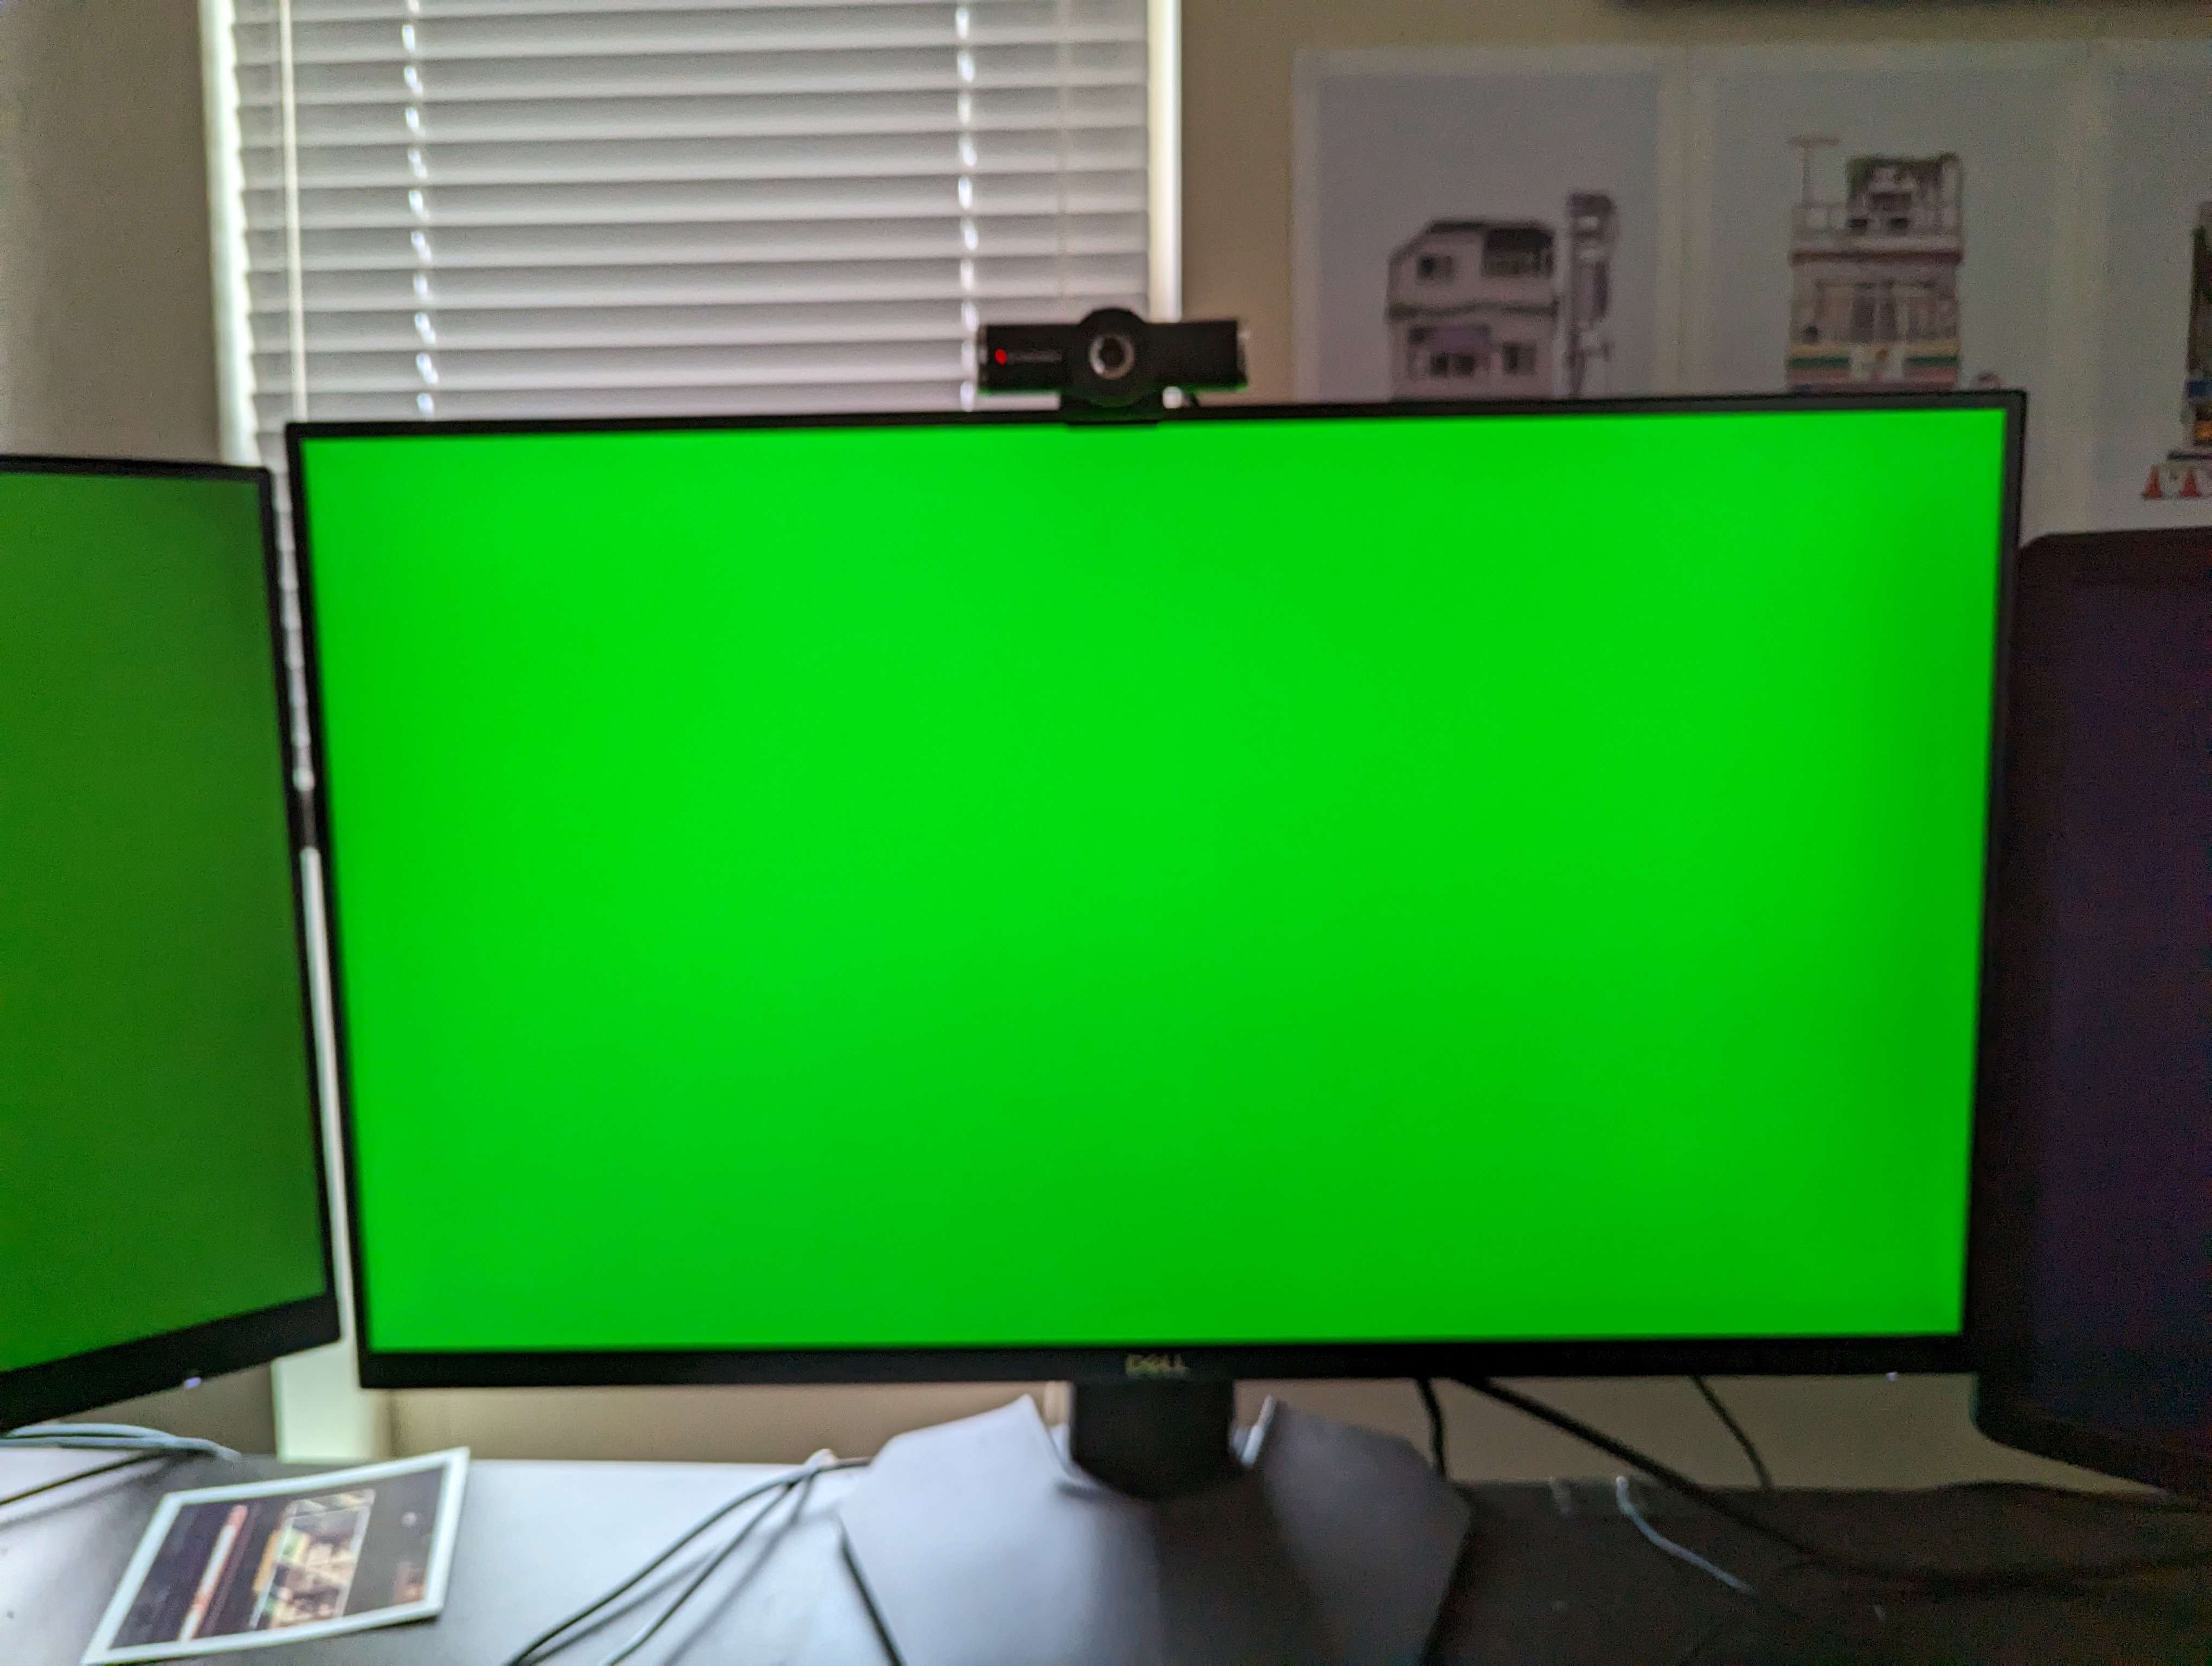 Photo of a computer with three monitors.  Two of the monitors are entirely green, and the rightmost monitor is black.  The monitors are on a black desk, there’s a window with the blinds closed behind it, and there are some art prints on the wall along with one on the desk.